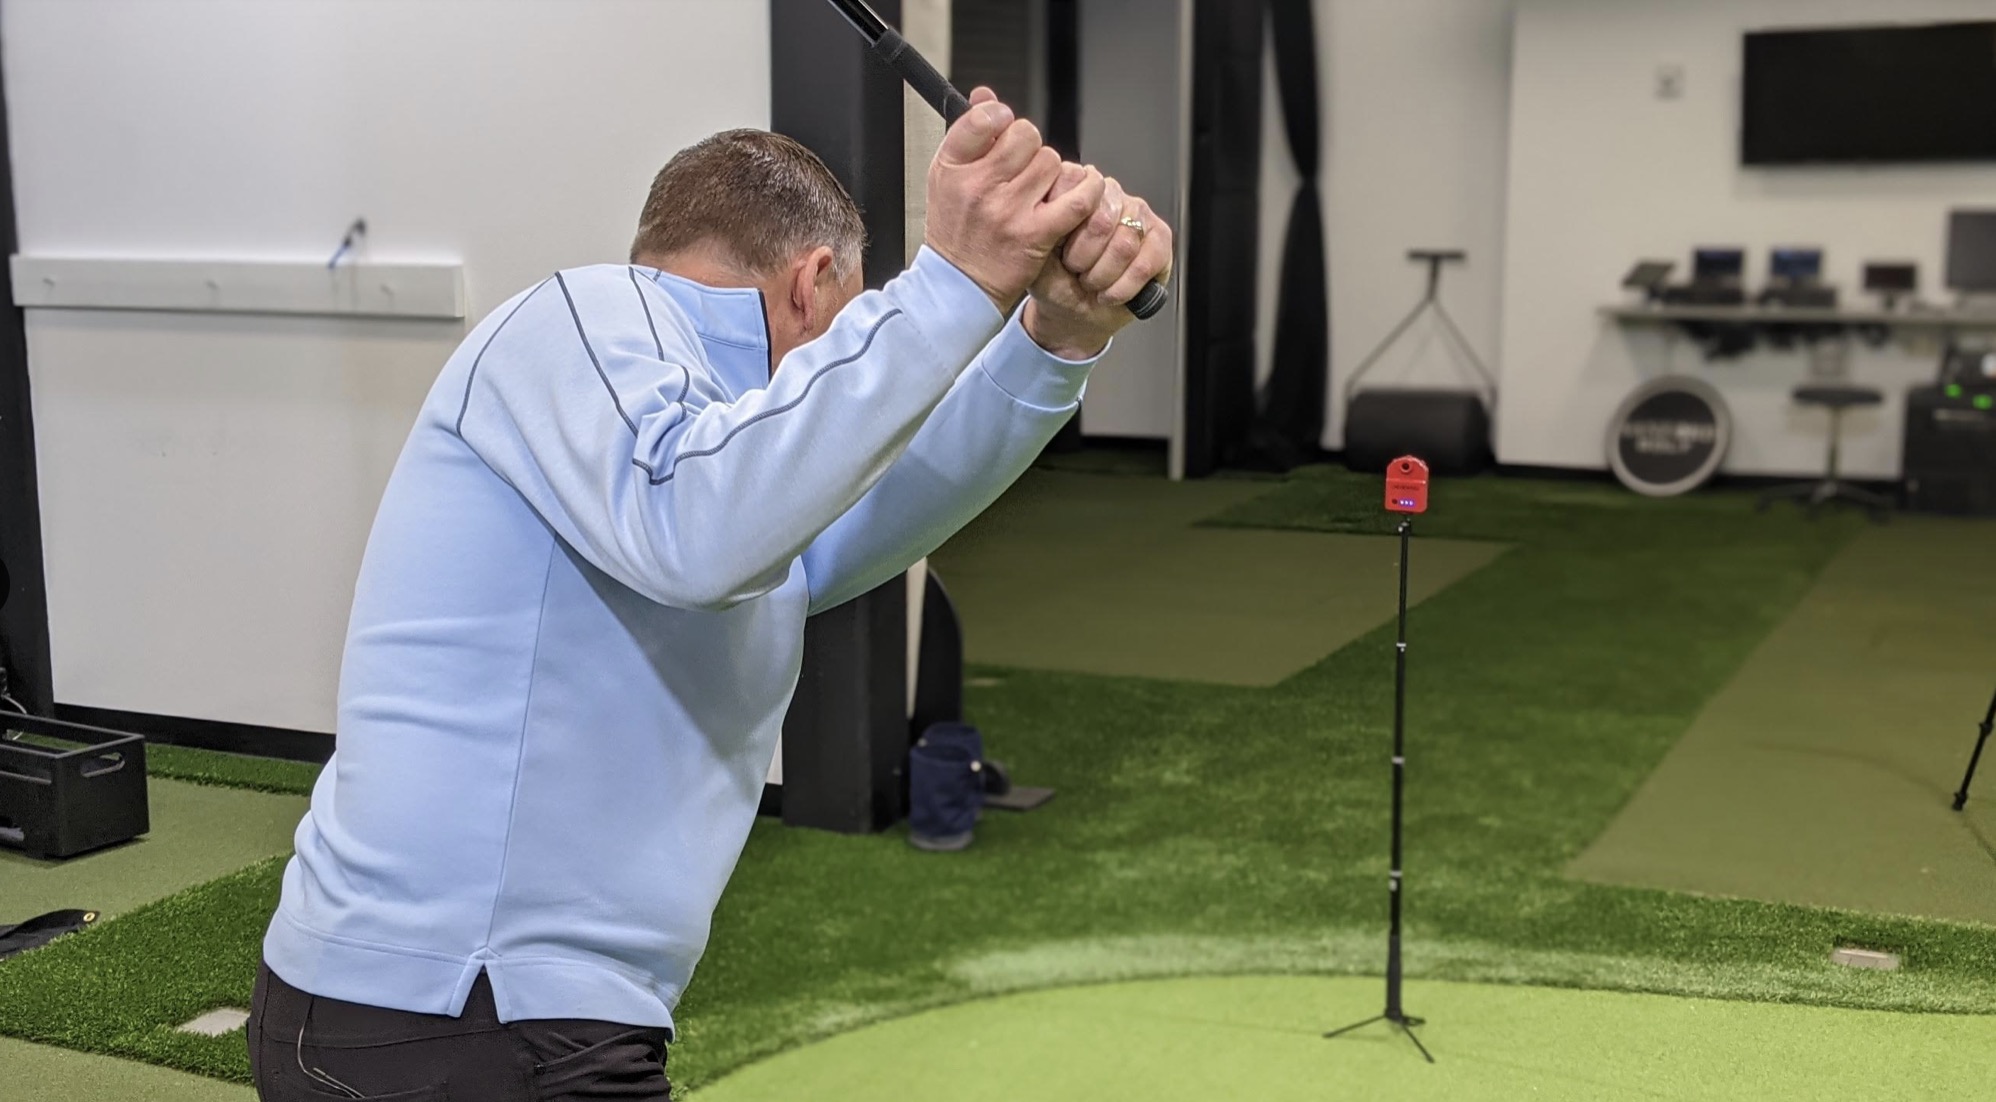 The Correct Golf Grip to Finally Cure the Slice - USGolfTV